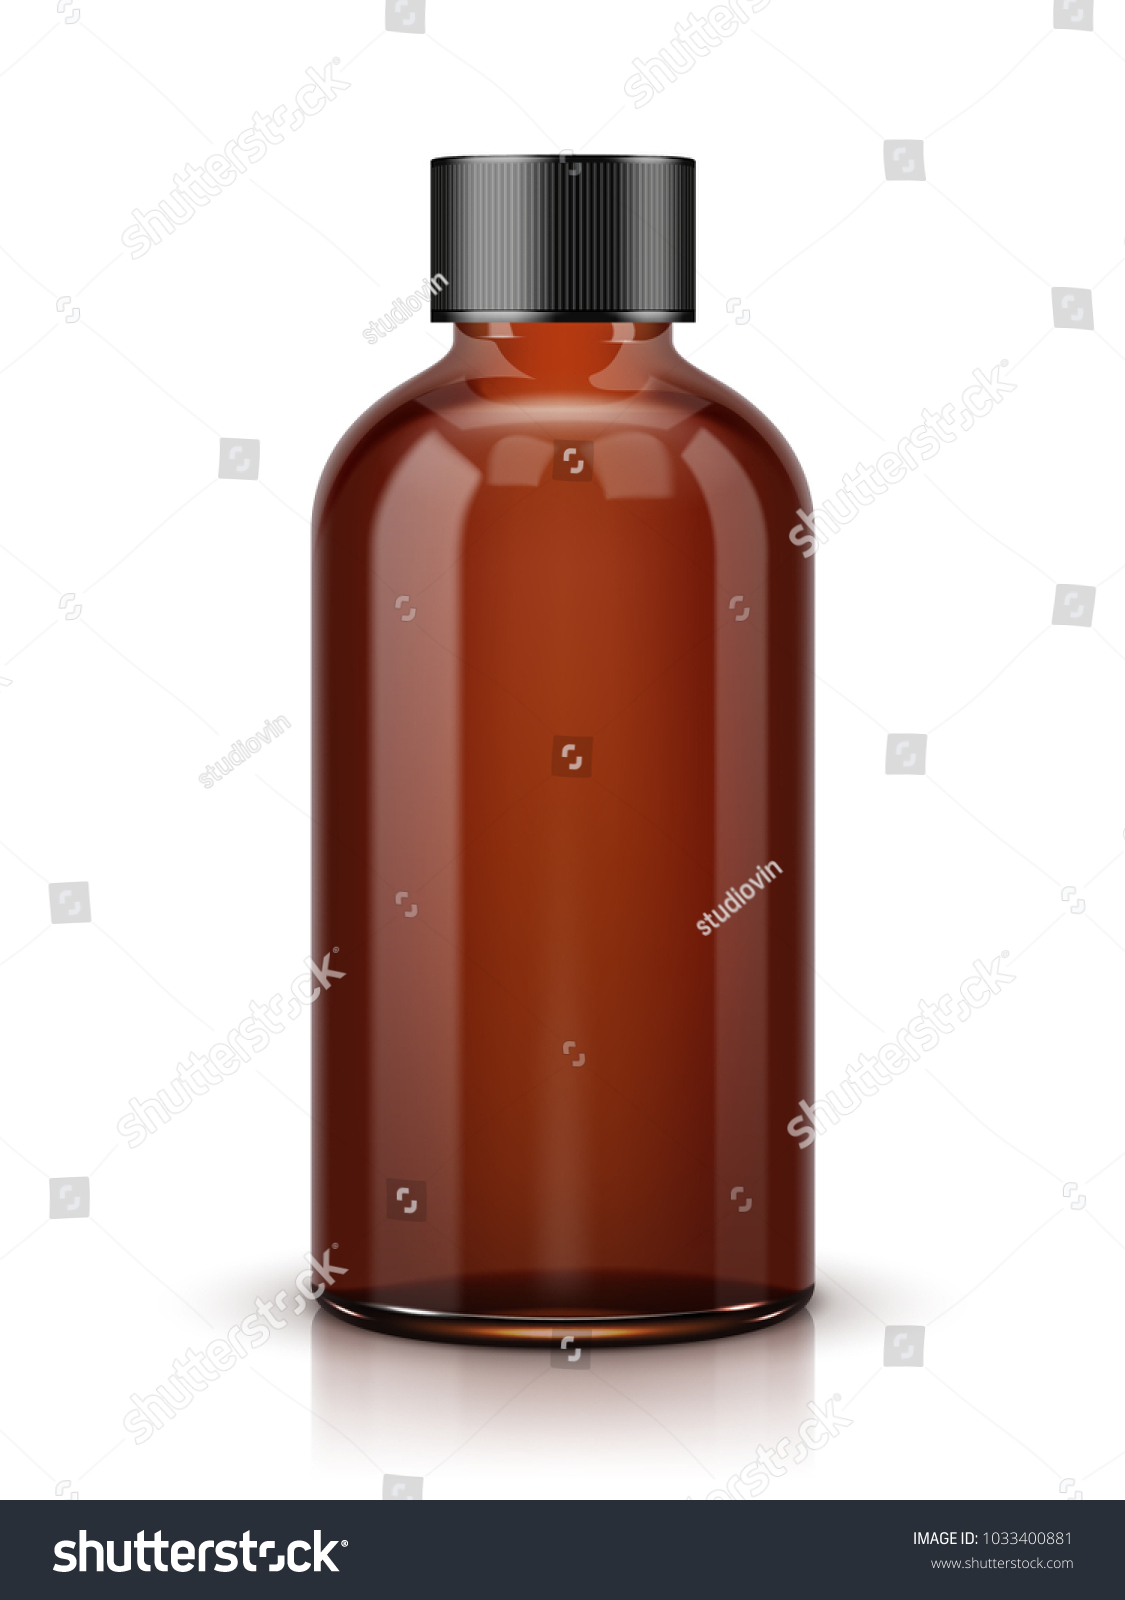 SVG of Brown cosmetic or perfume bottle isolated on white background svg